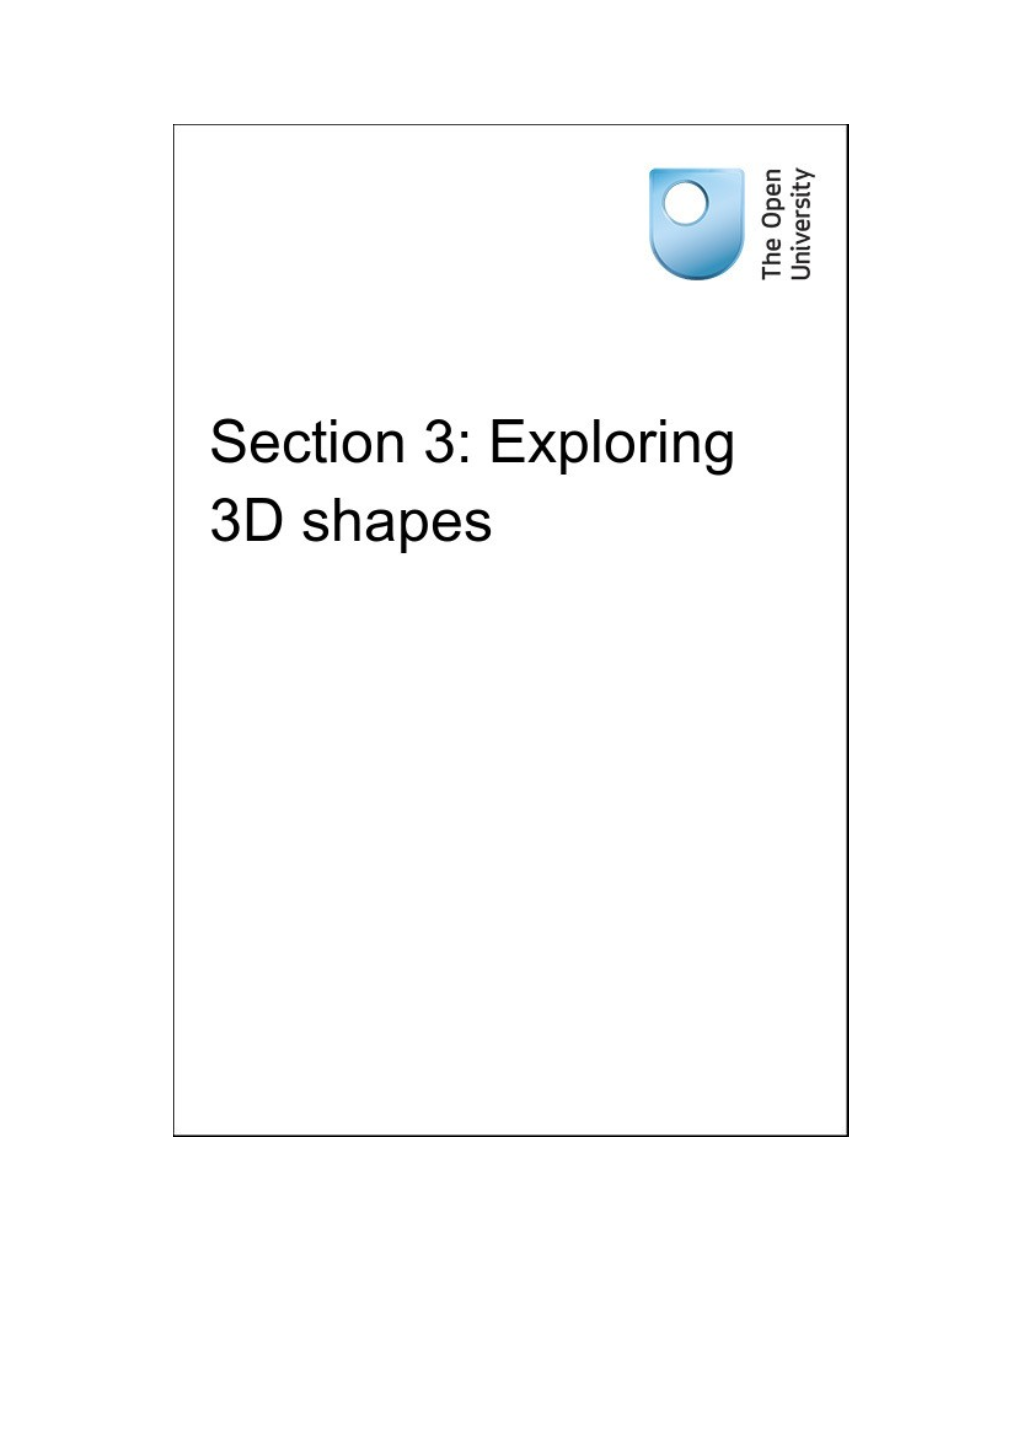 Section 3: Exploring 3D Shapes